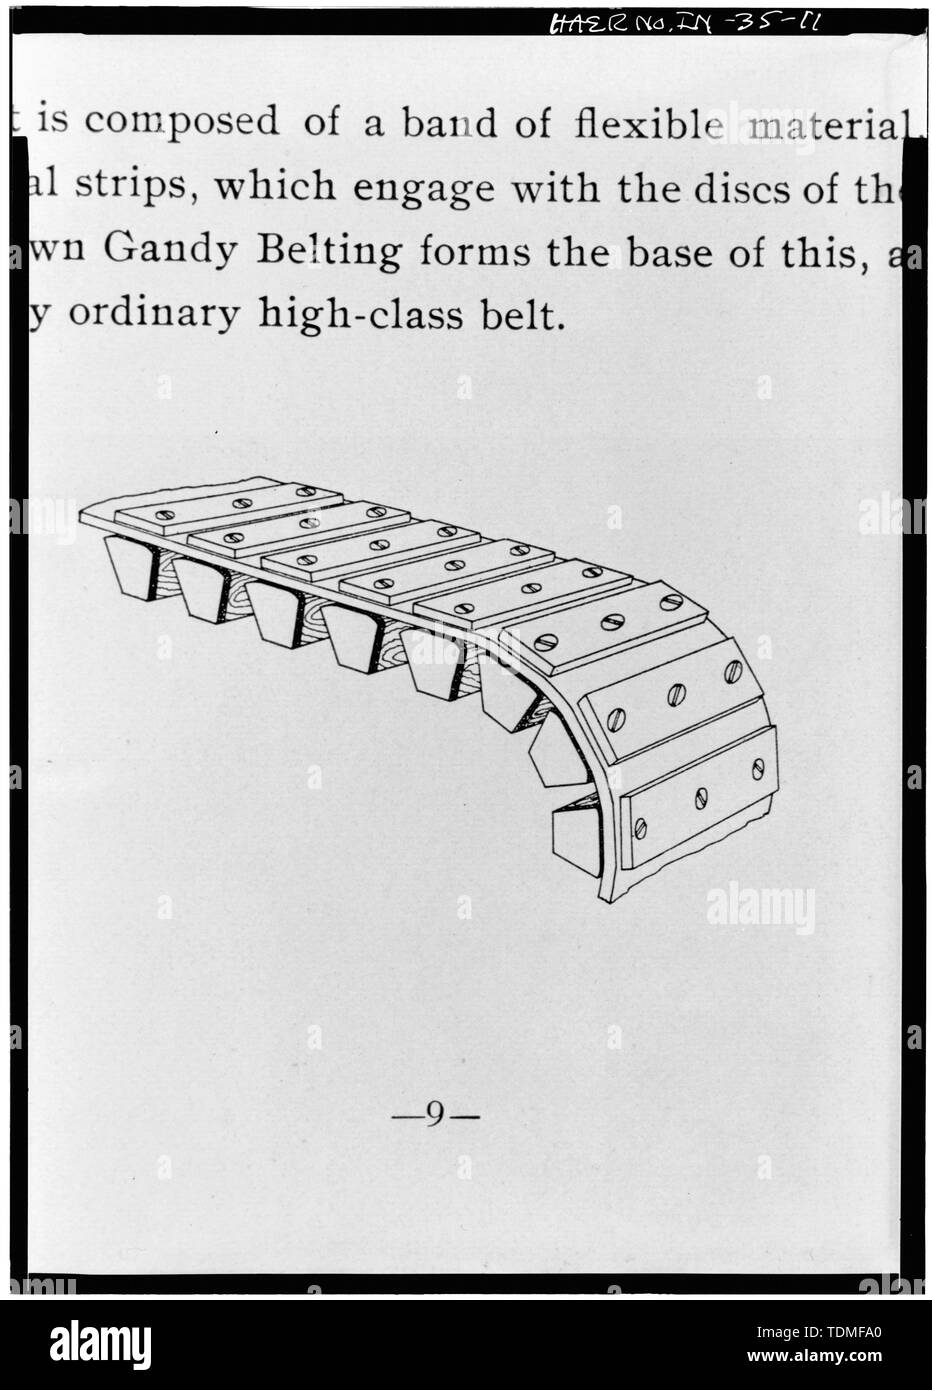 PHOTOCOPY OF DETAIL OF THE GANDY BELTING SYSTEM - Buckeye Manufacturing Company, Columbia Avenue, Anderson, Madison County, IN; Lambert Brothers Manufacturing Company; Lambert, John William; Boucher, Jack E; Sackheim, Donald; Rosenberg, Robert Stock Photo